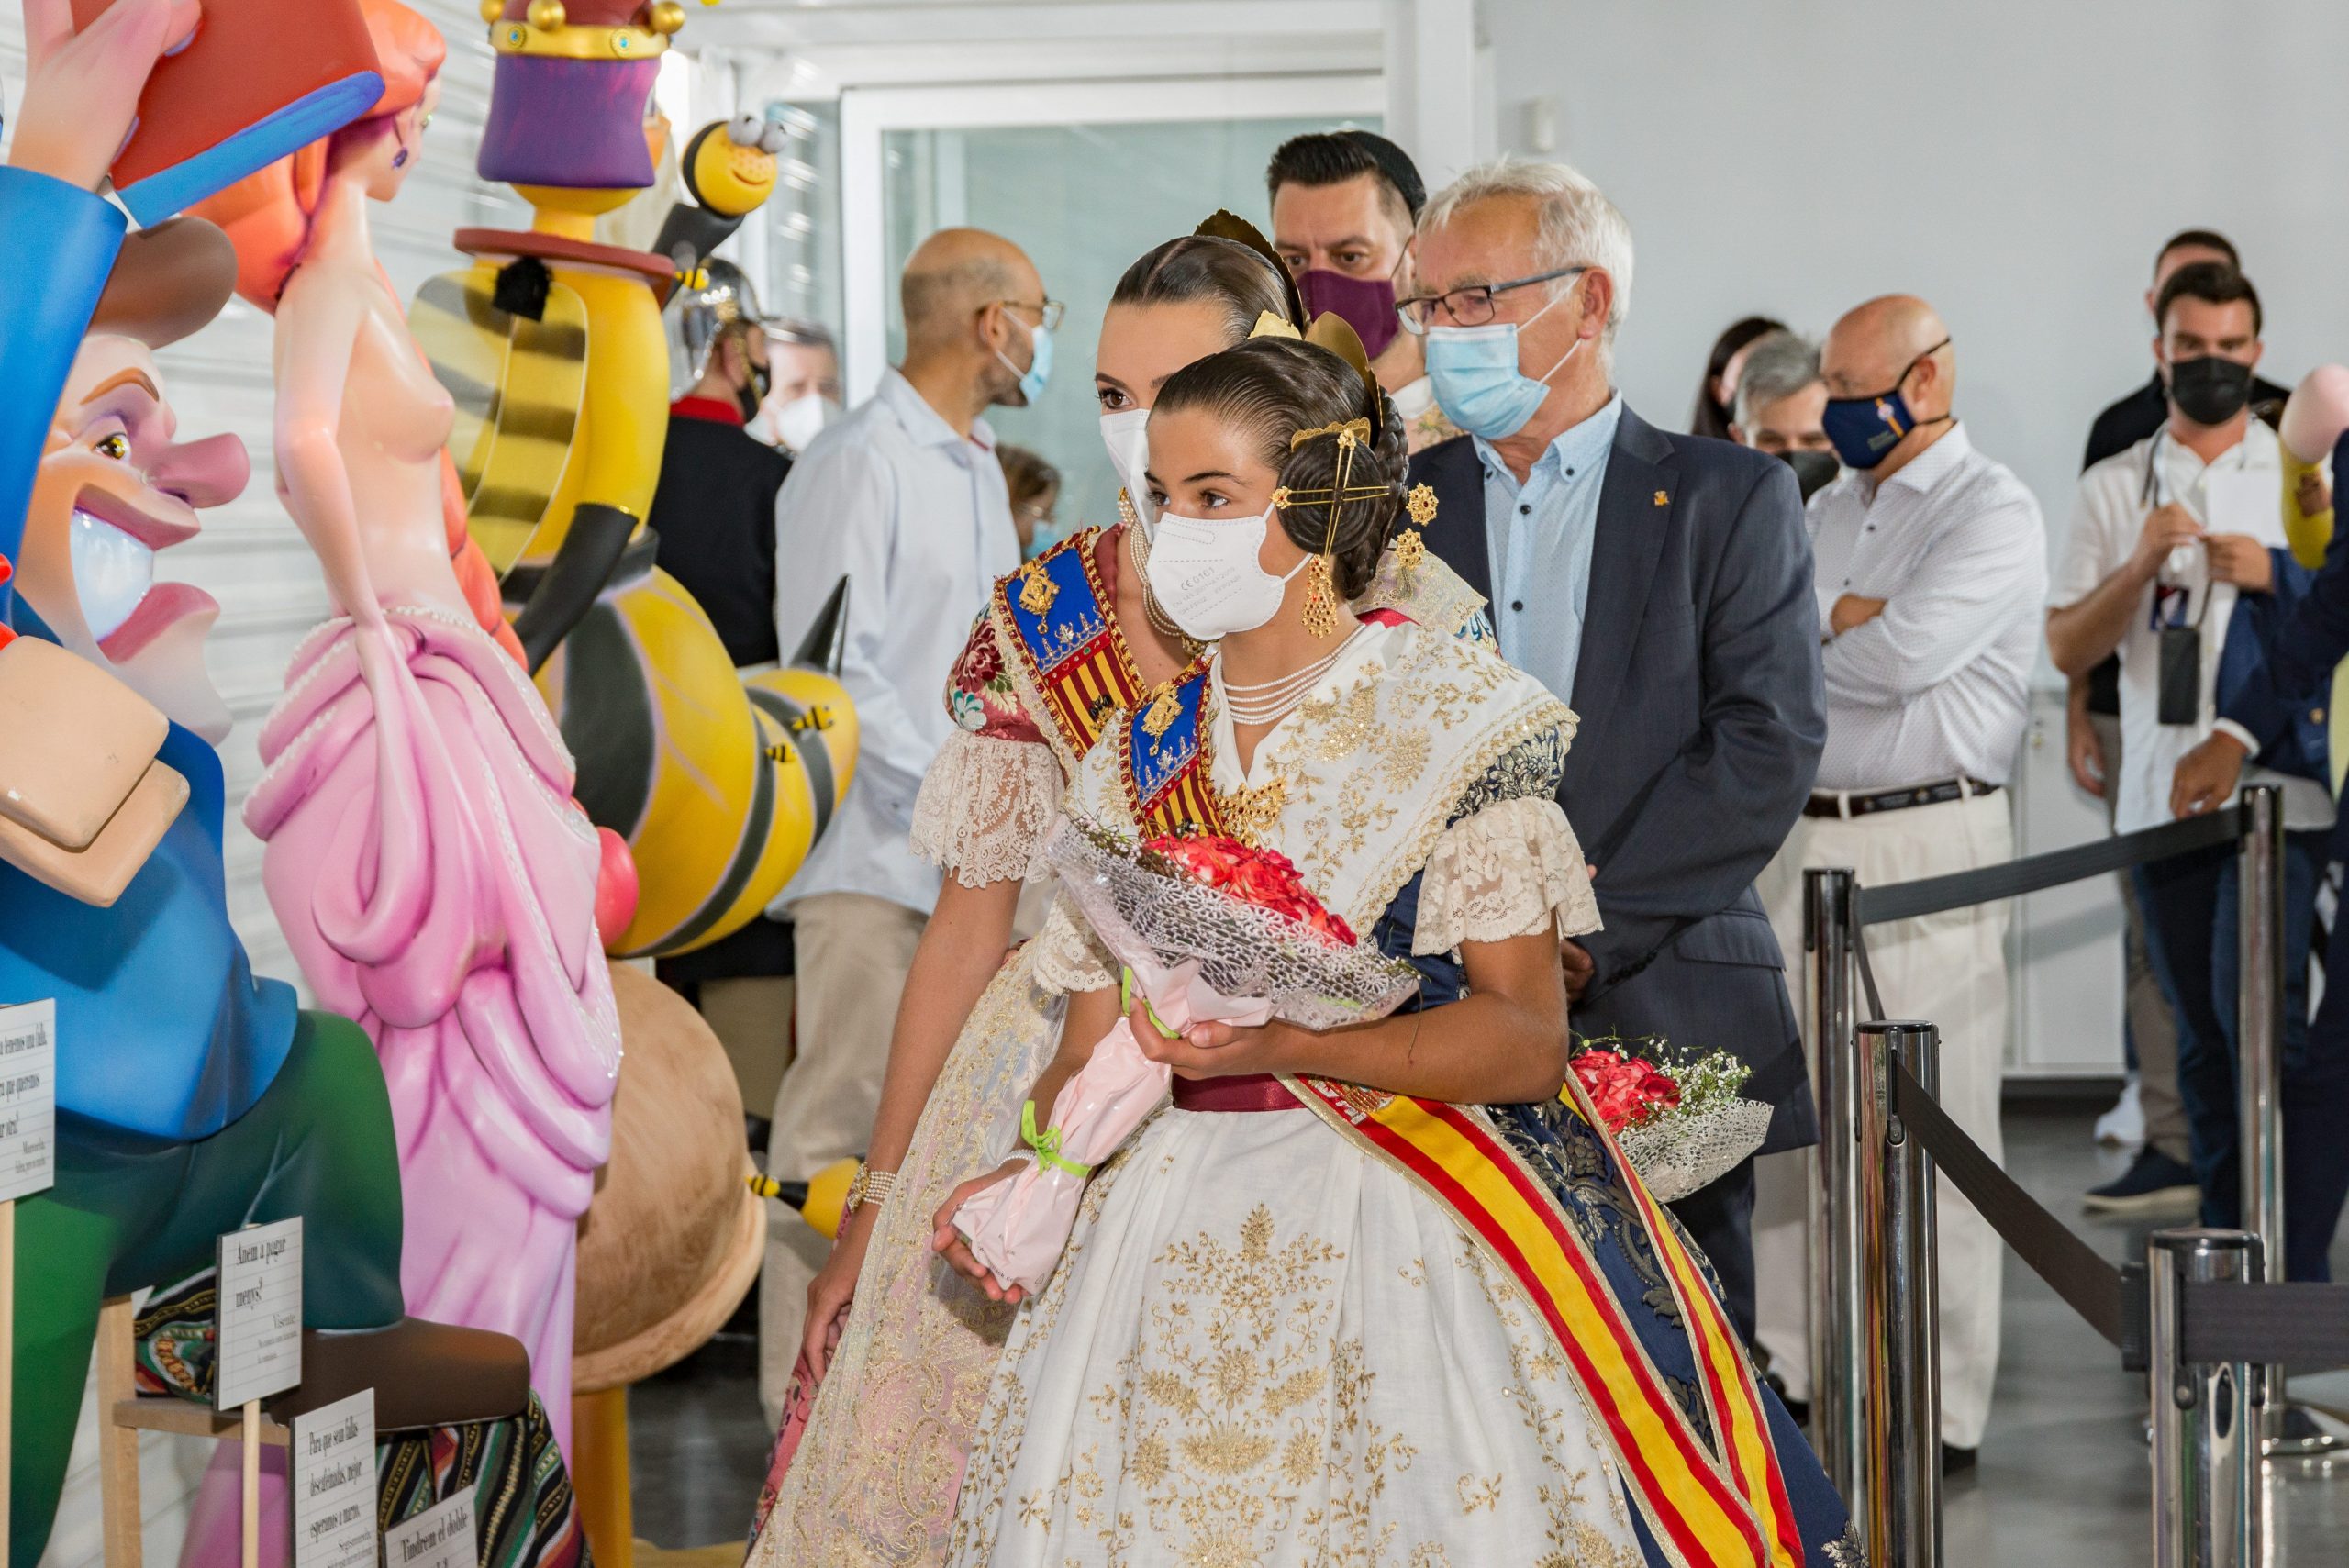 Opening Of The Ninot Exhibition In Spain 16 July 2021.